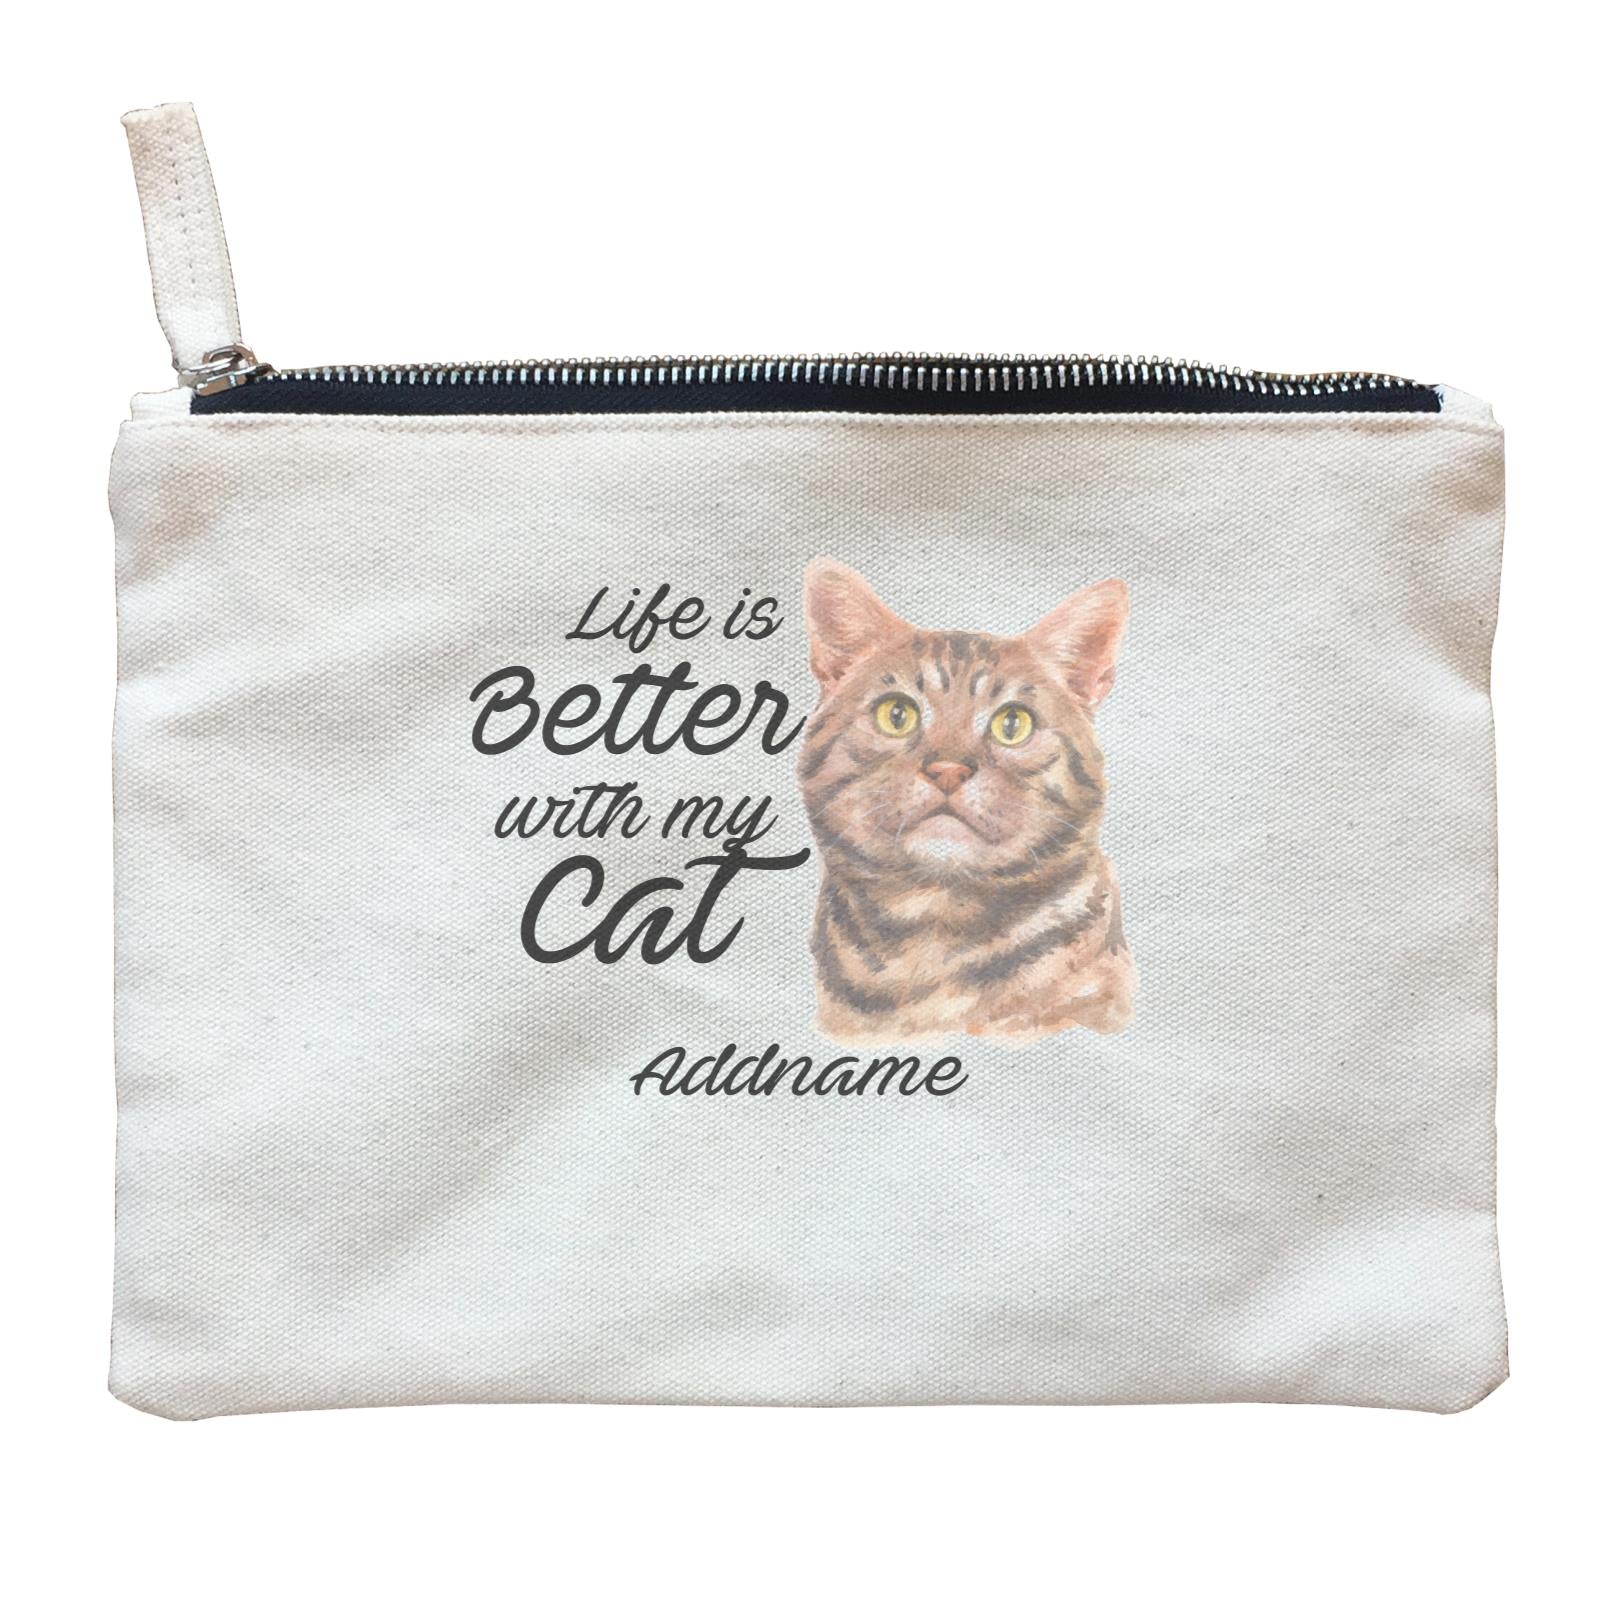 Watercolor Life is Better With My Cat Brown American Shorthair Cat Addname Zipper Pouch